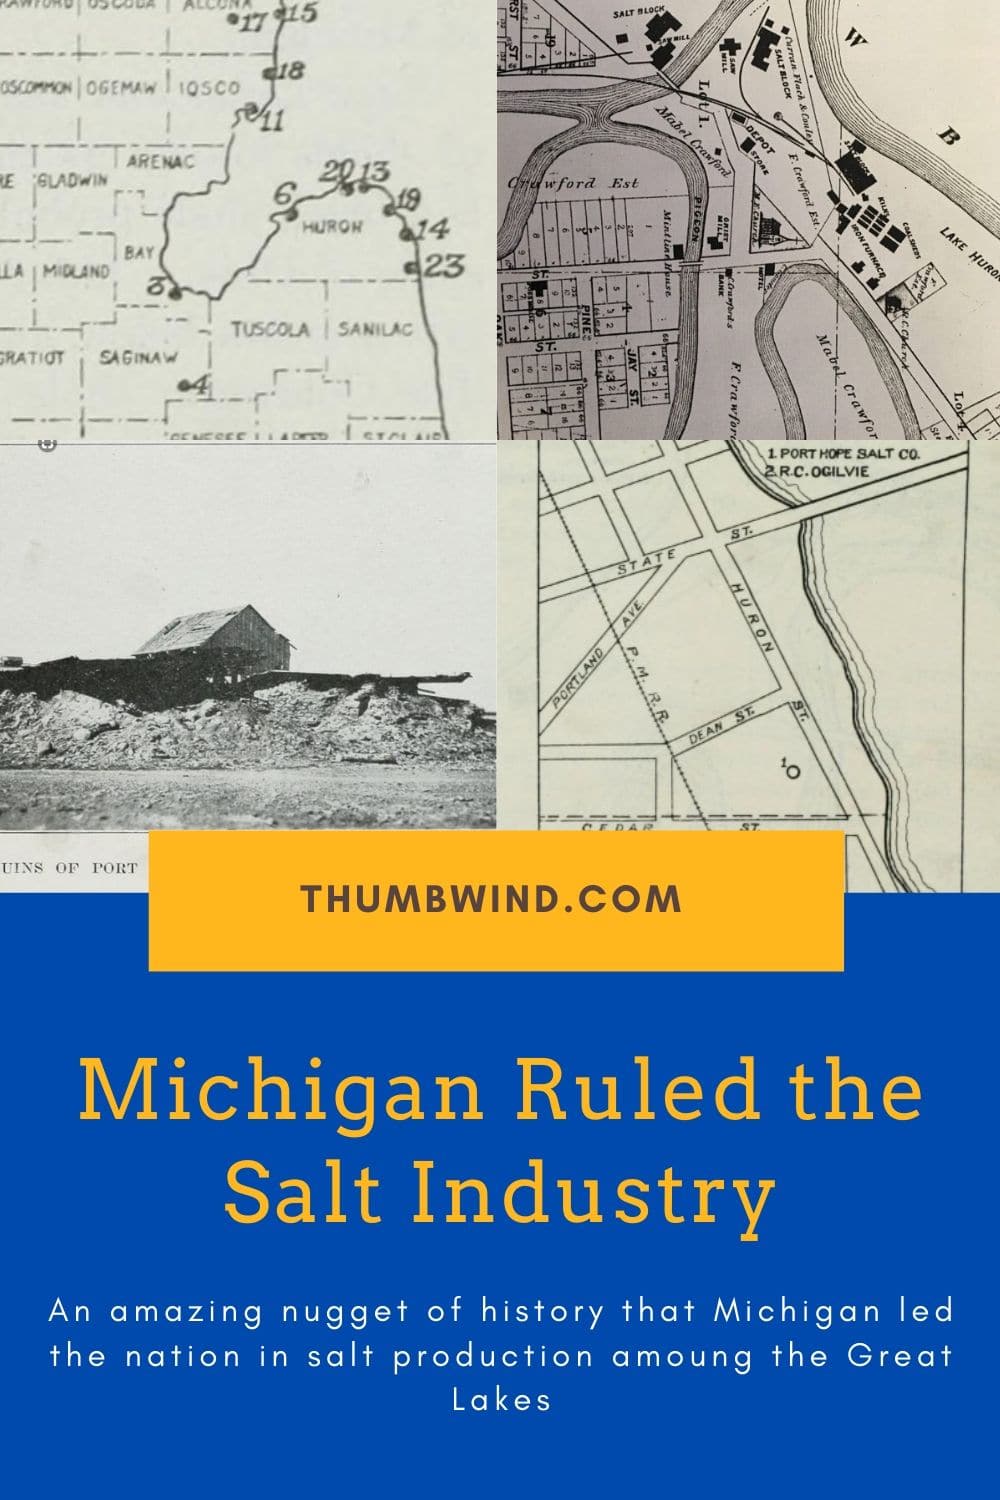 The production of salt from the deep brine wells around  the #Michigan #UpperThumb propelled the fishing industry to national prominence. because the product could be shipped preserved in barrels.  Also Michigan was the leading producer of #Salt in the late 1800s.  